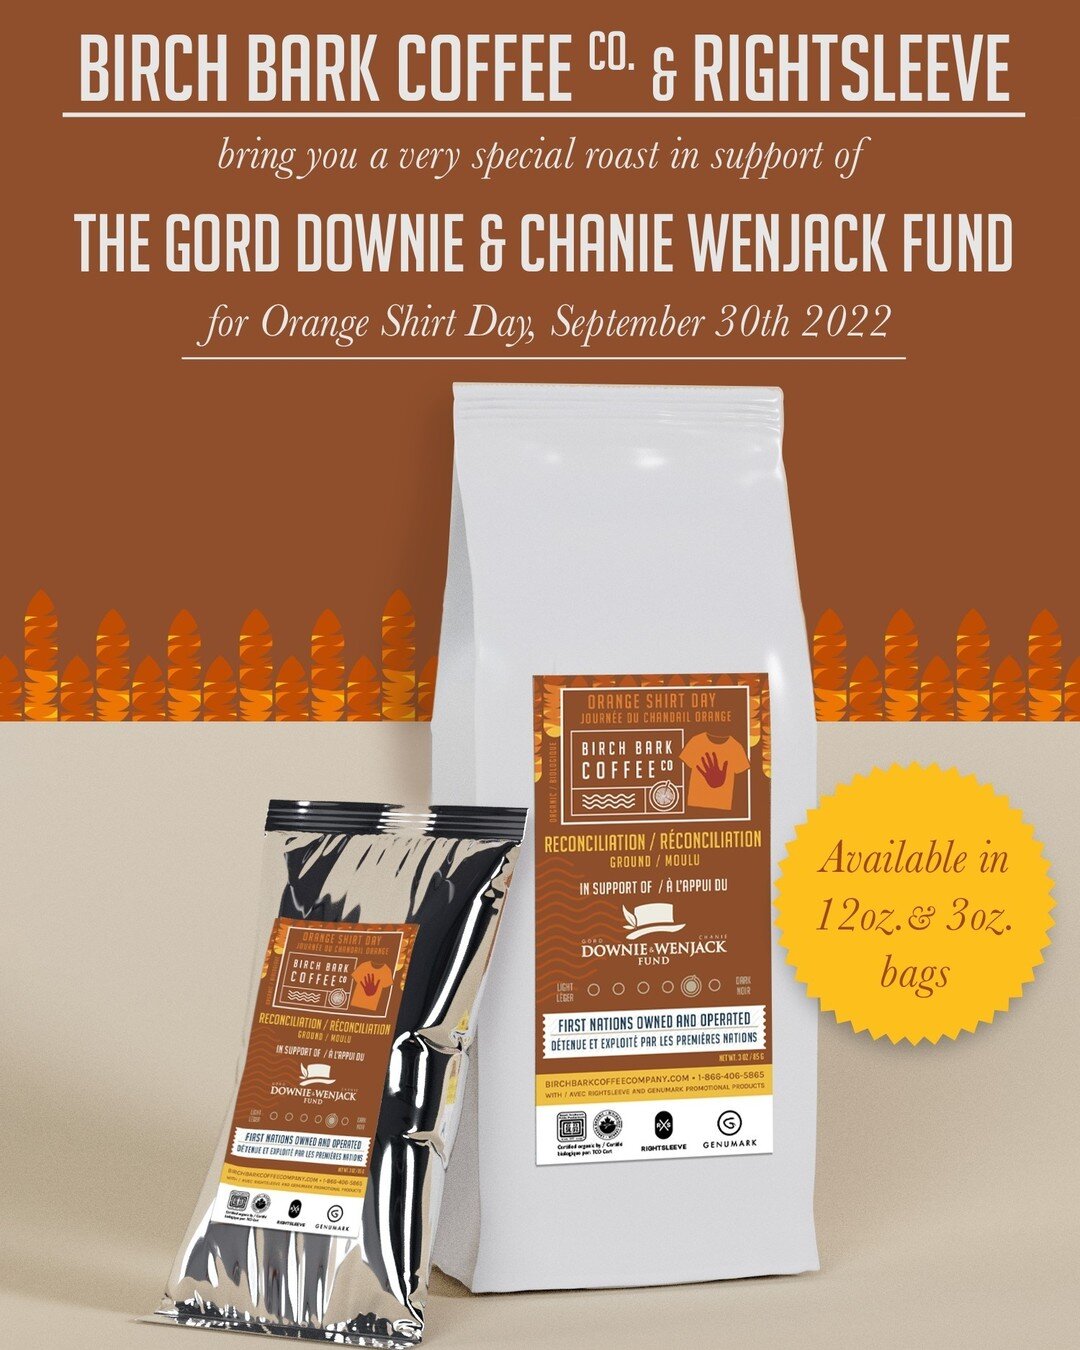 This September, Rightsleeve will once again be partnering with #FirstNations owned &amp; operated @birchbarkcoffee in support of @downiewenjack for #OrangeShirtDay 2022. 

Join us in supporting the Downie Wenjack Fund by gifting this great coffee to 